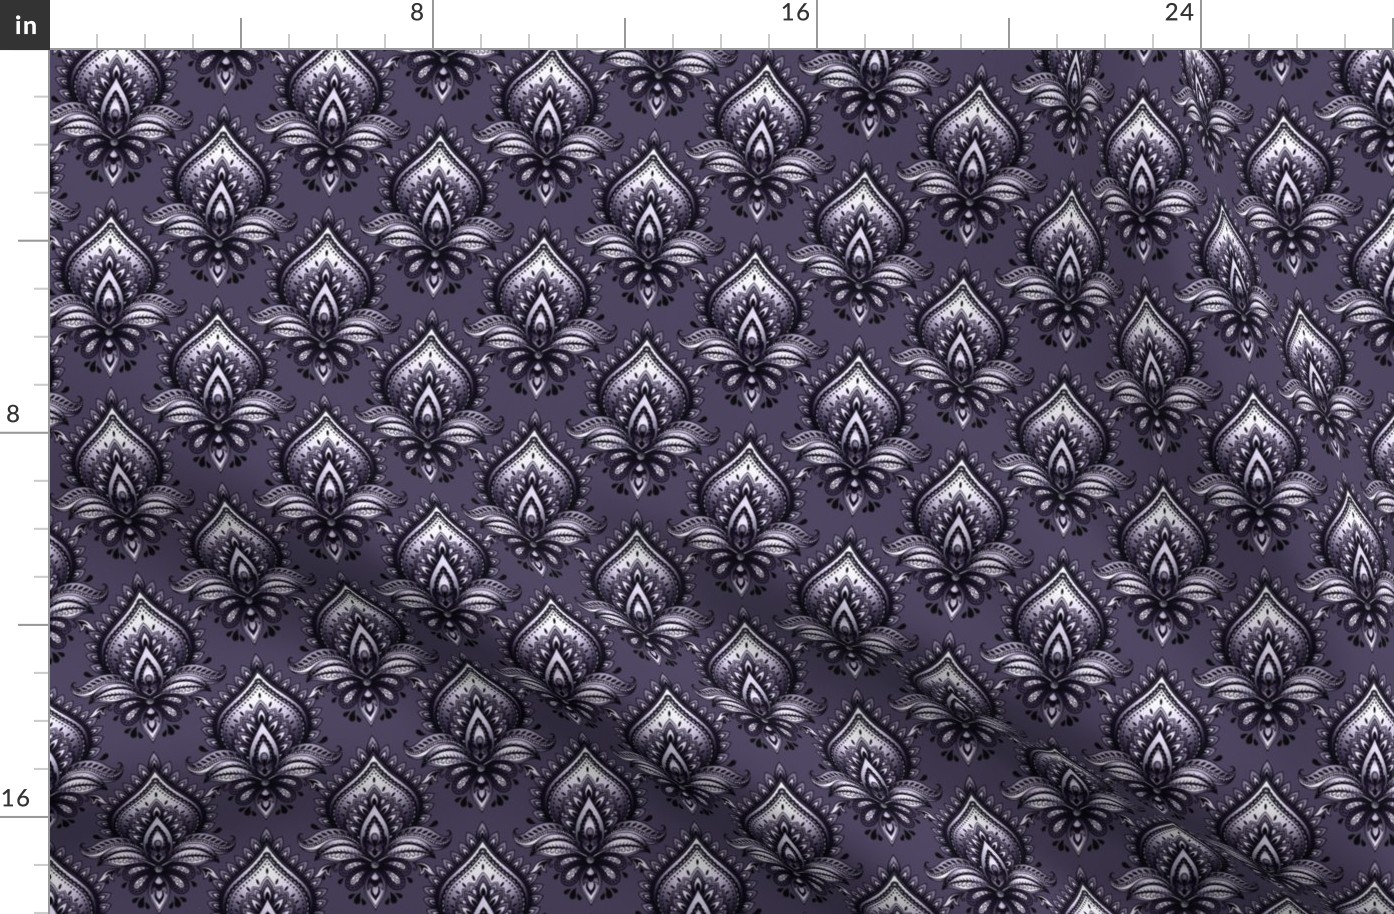 Shimmering Paisley Damask in Royal Purple Monochrome - Coordinate